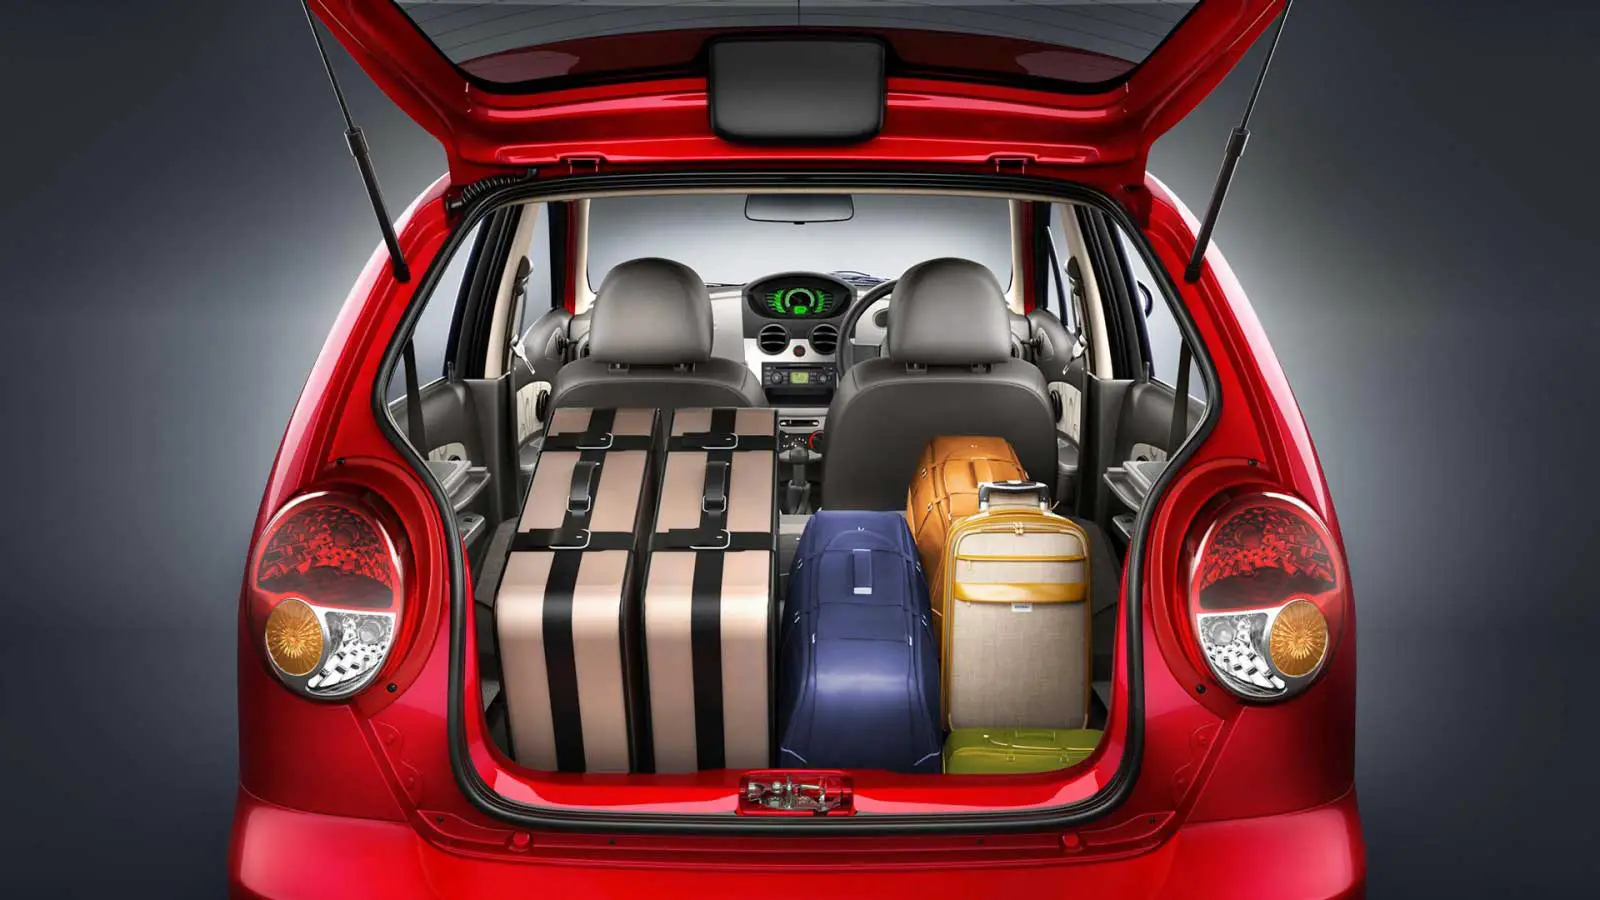 Chevrolet Spark LS 1.0 BS-IV OBDII Interior luggage space